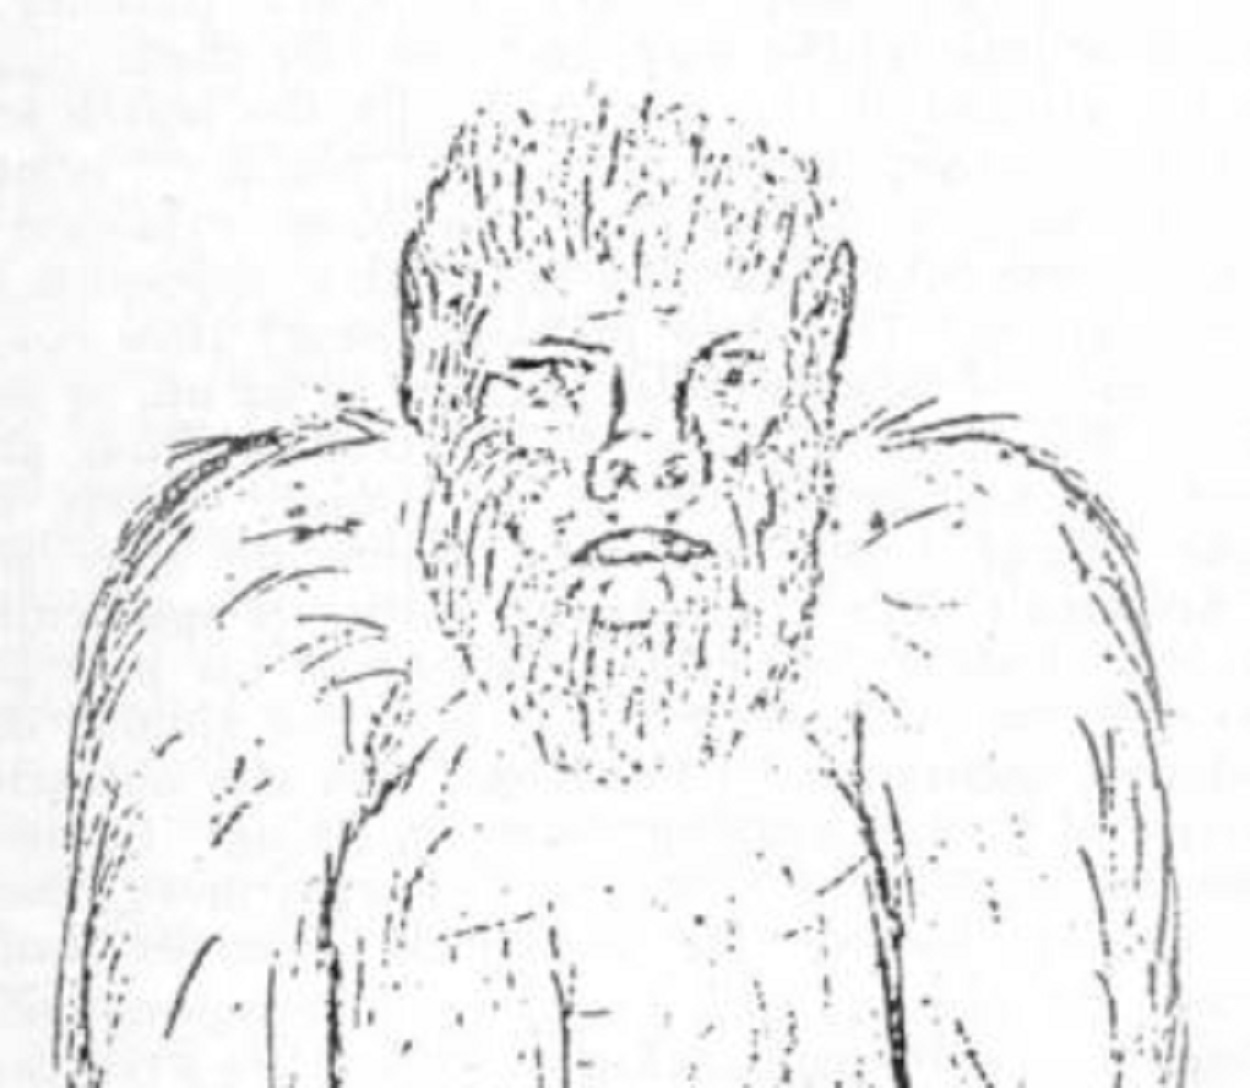 A depiction of a similar creature to the one Pulaski witnessed